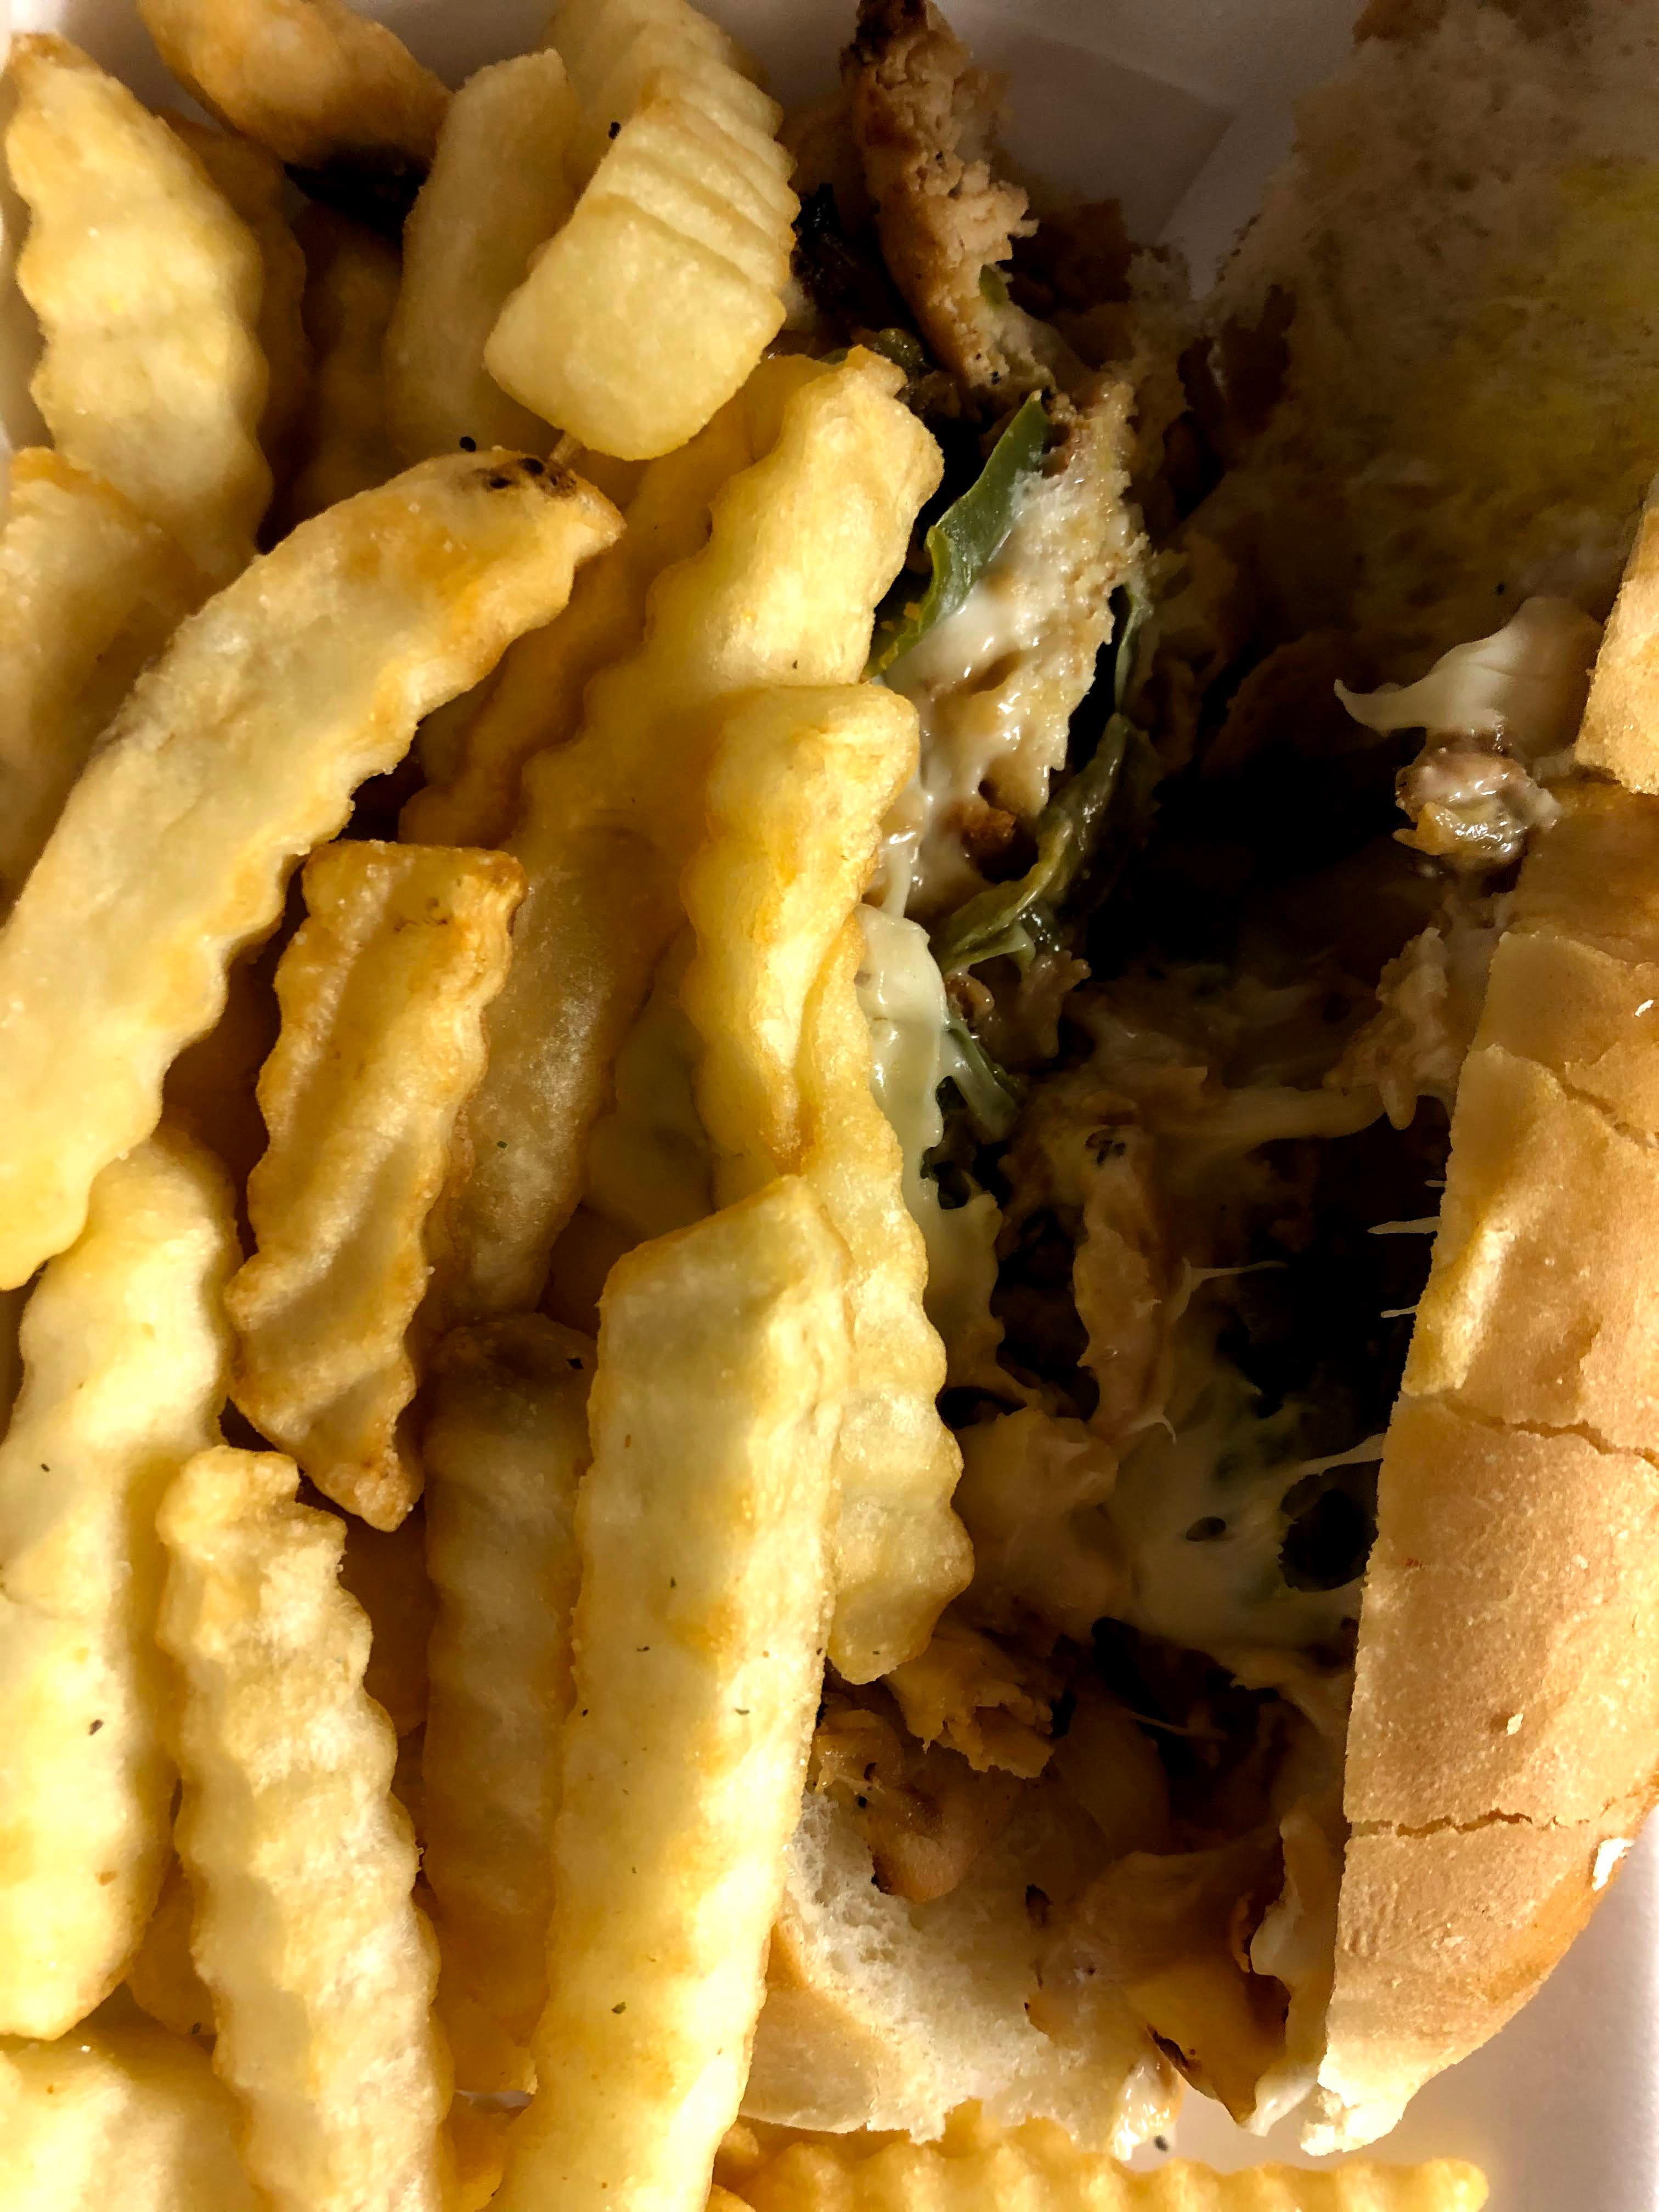 A close up of french fries and cheesesteak from Come Get This. Photo by Remington Rock.